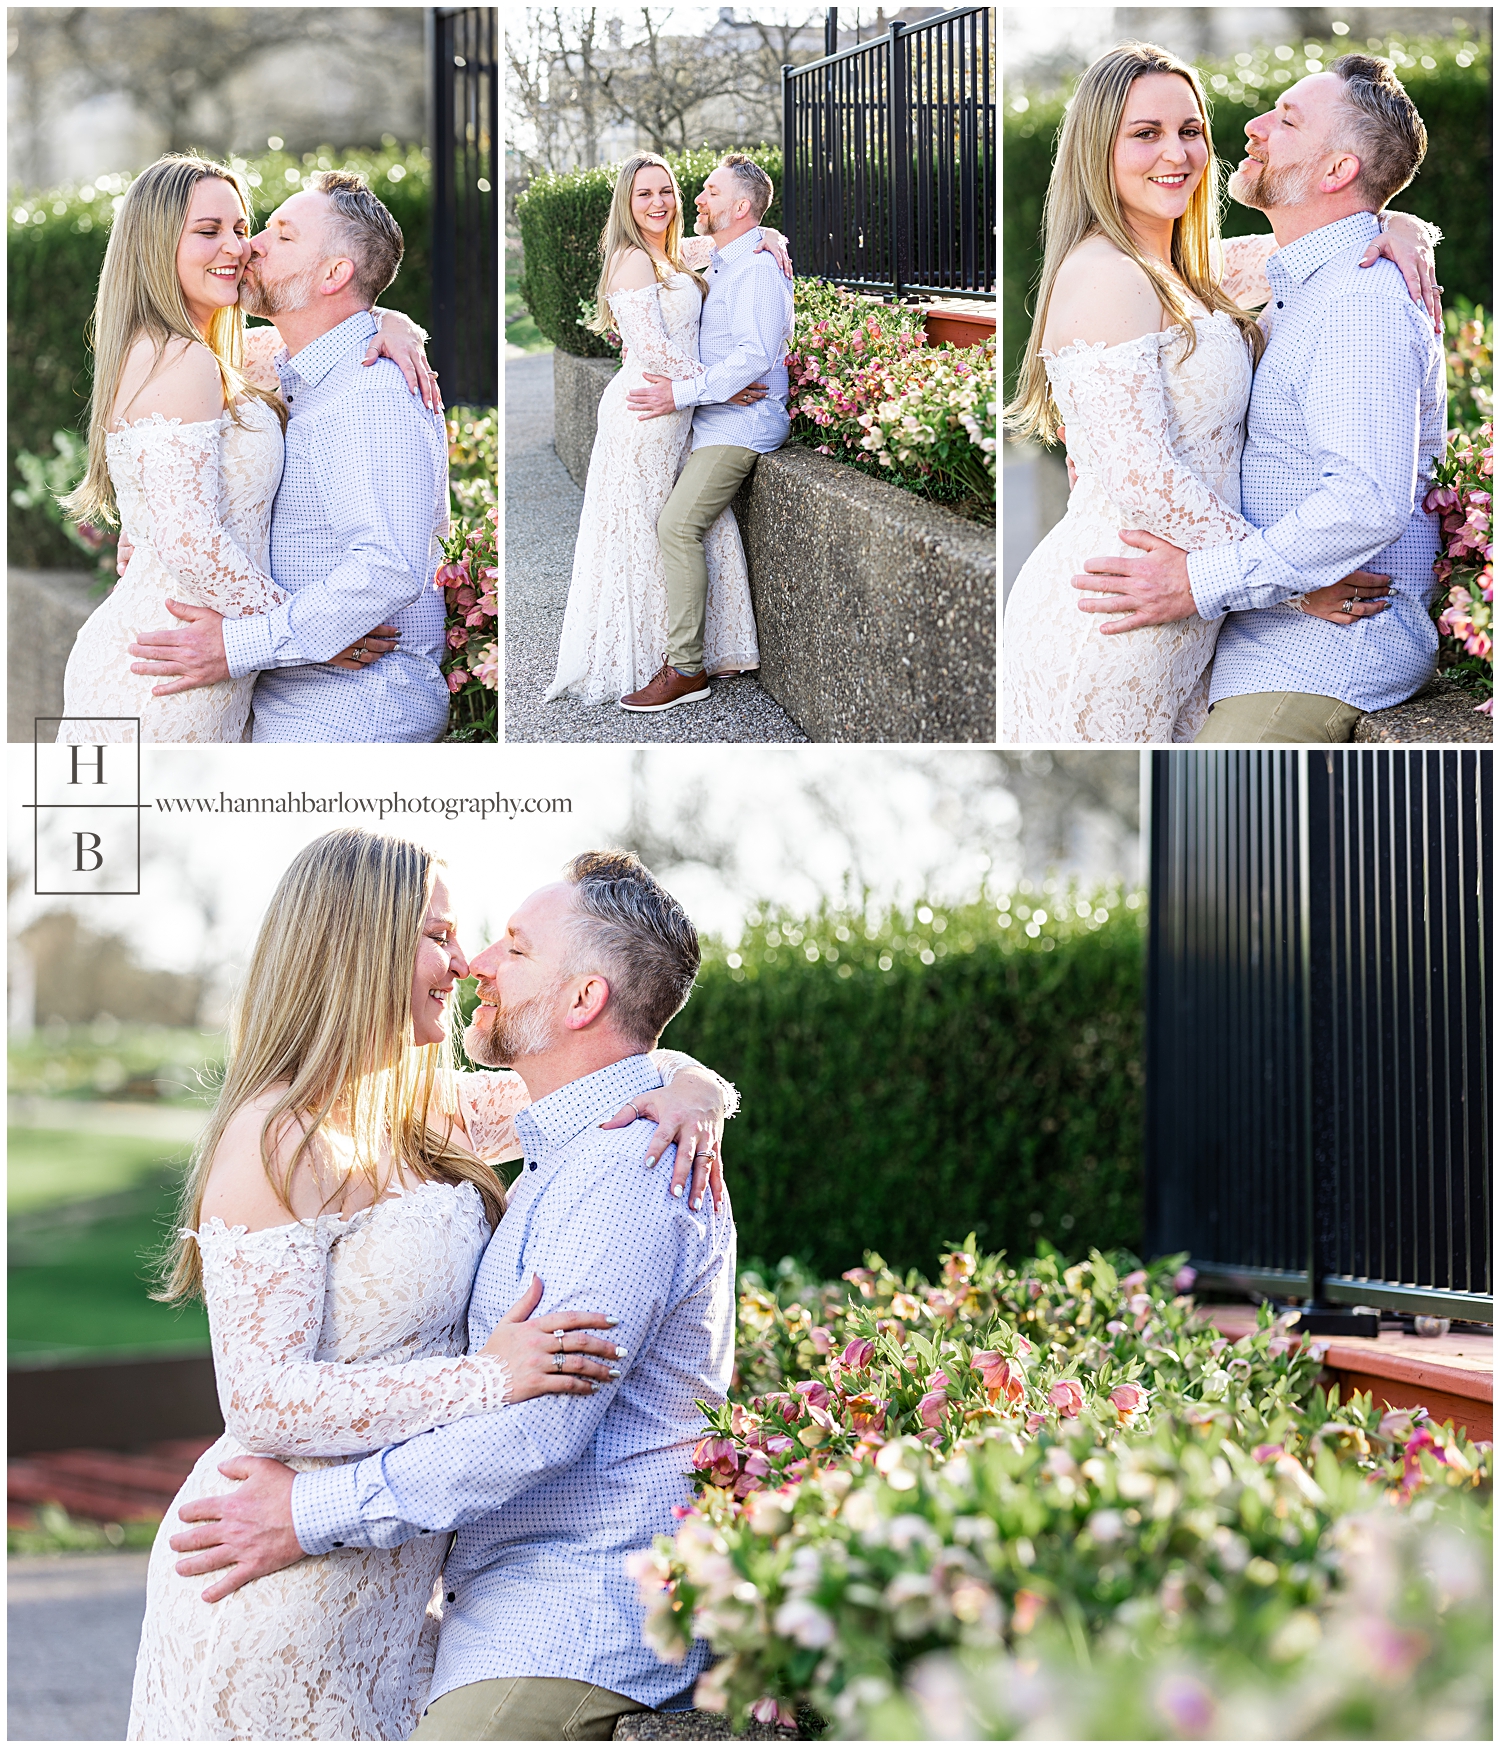 Collage of couple posing for engagement photos by spring flower bed.